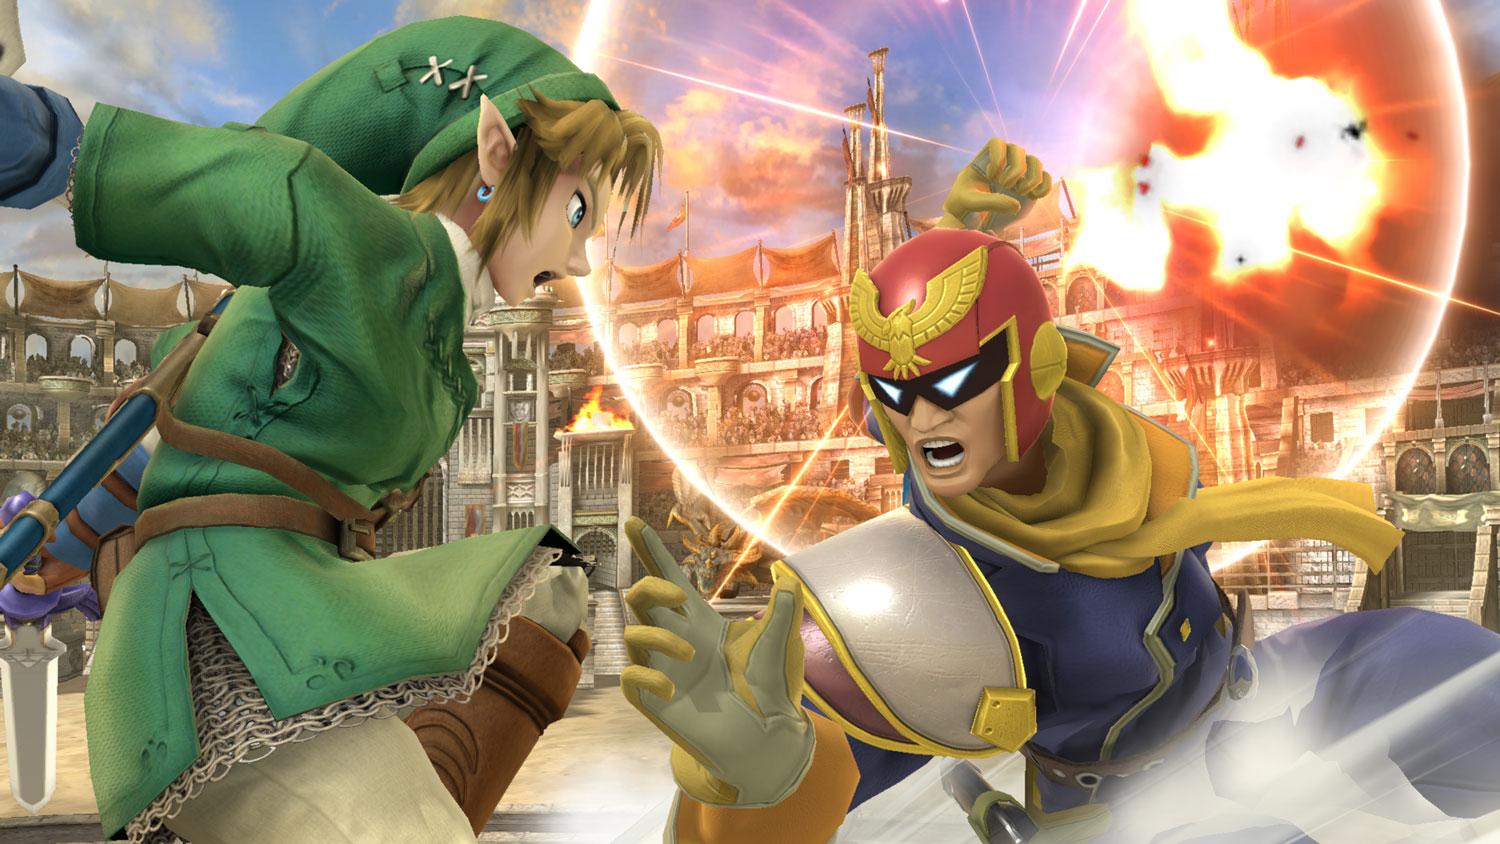 Play Super Smash Bros. Melee On Your iPhone 